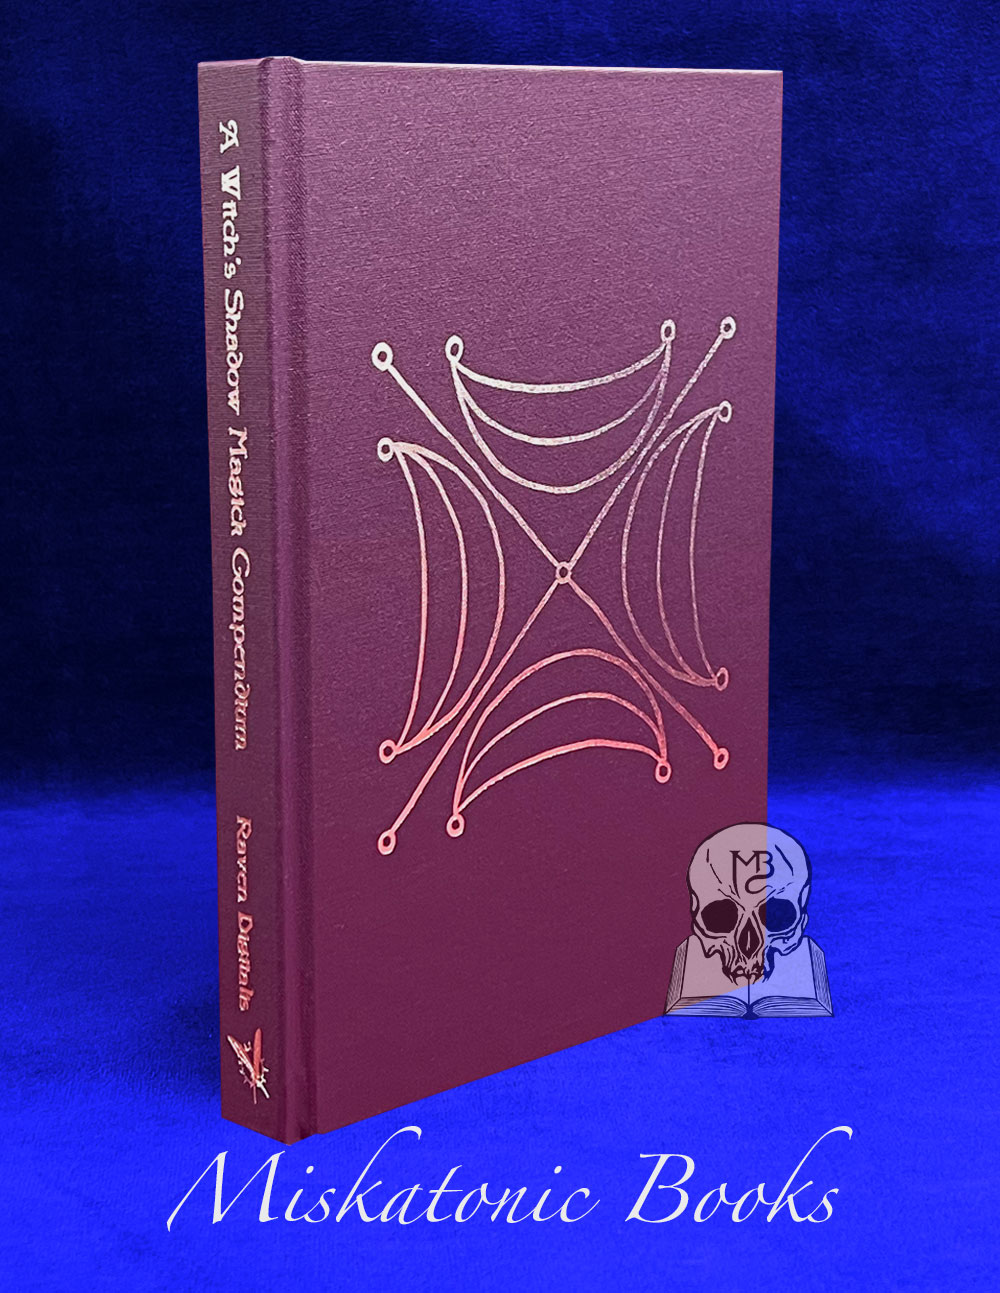 A WITCH'S SHADOW MAGICK COMPENDIUM by Raven Digitalis - Signed Limited Edition Hardcover